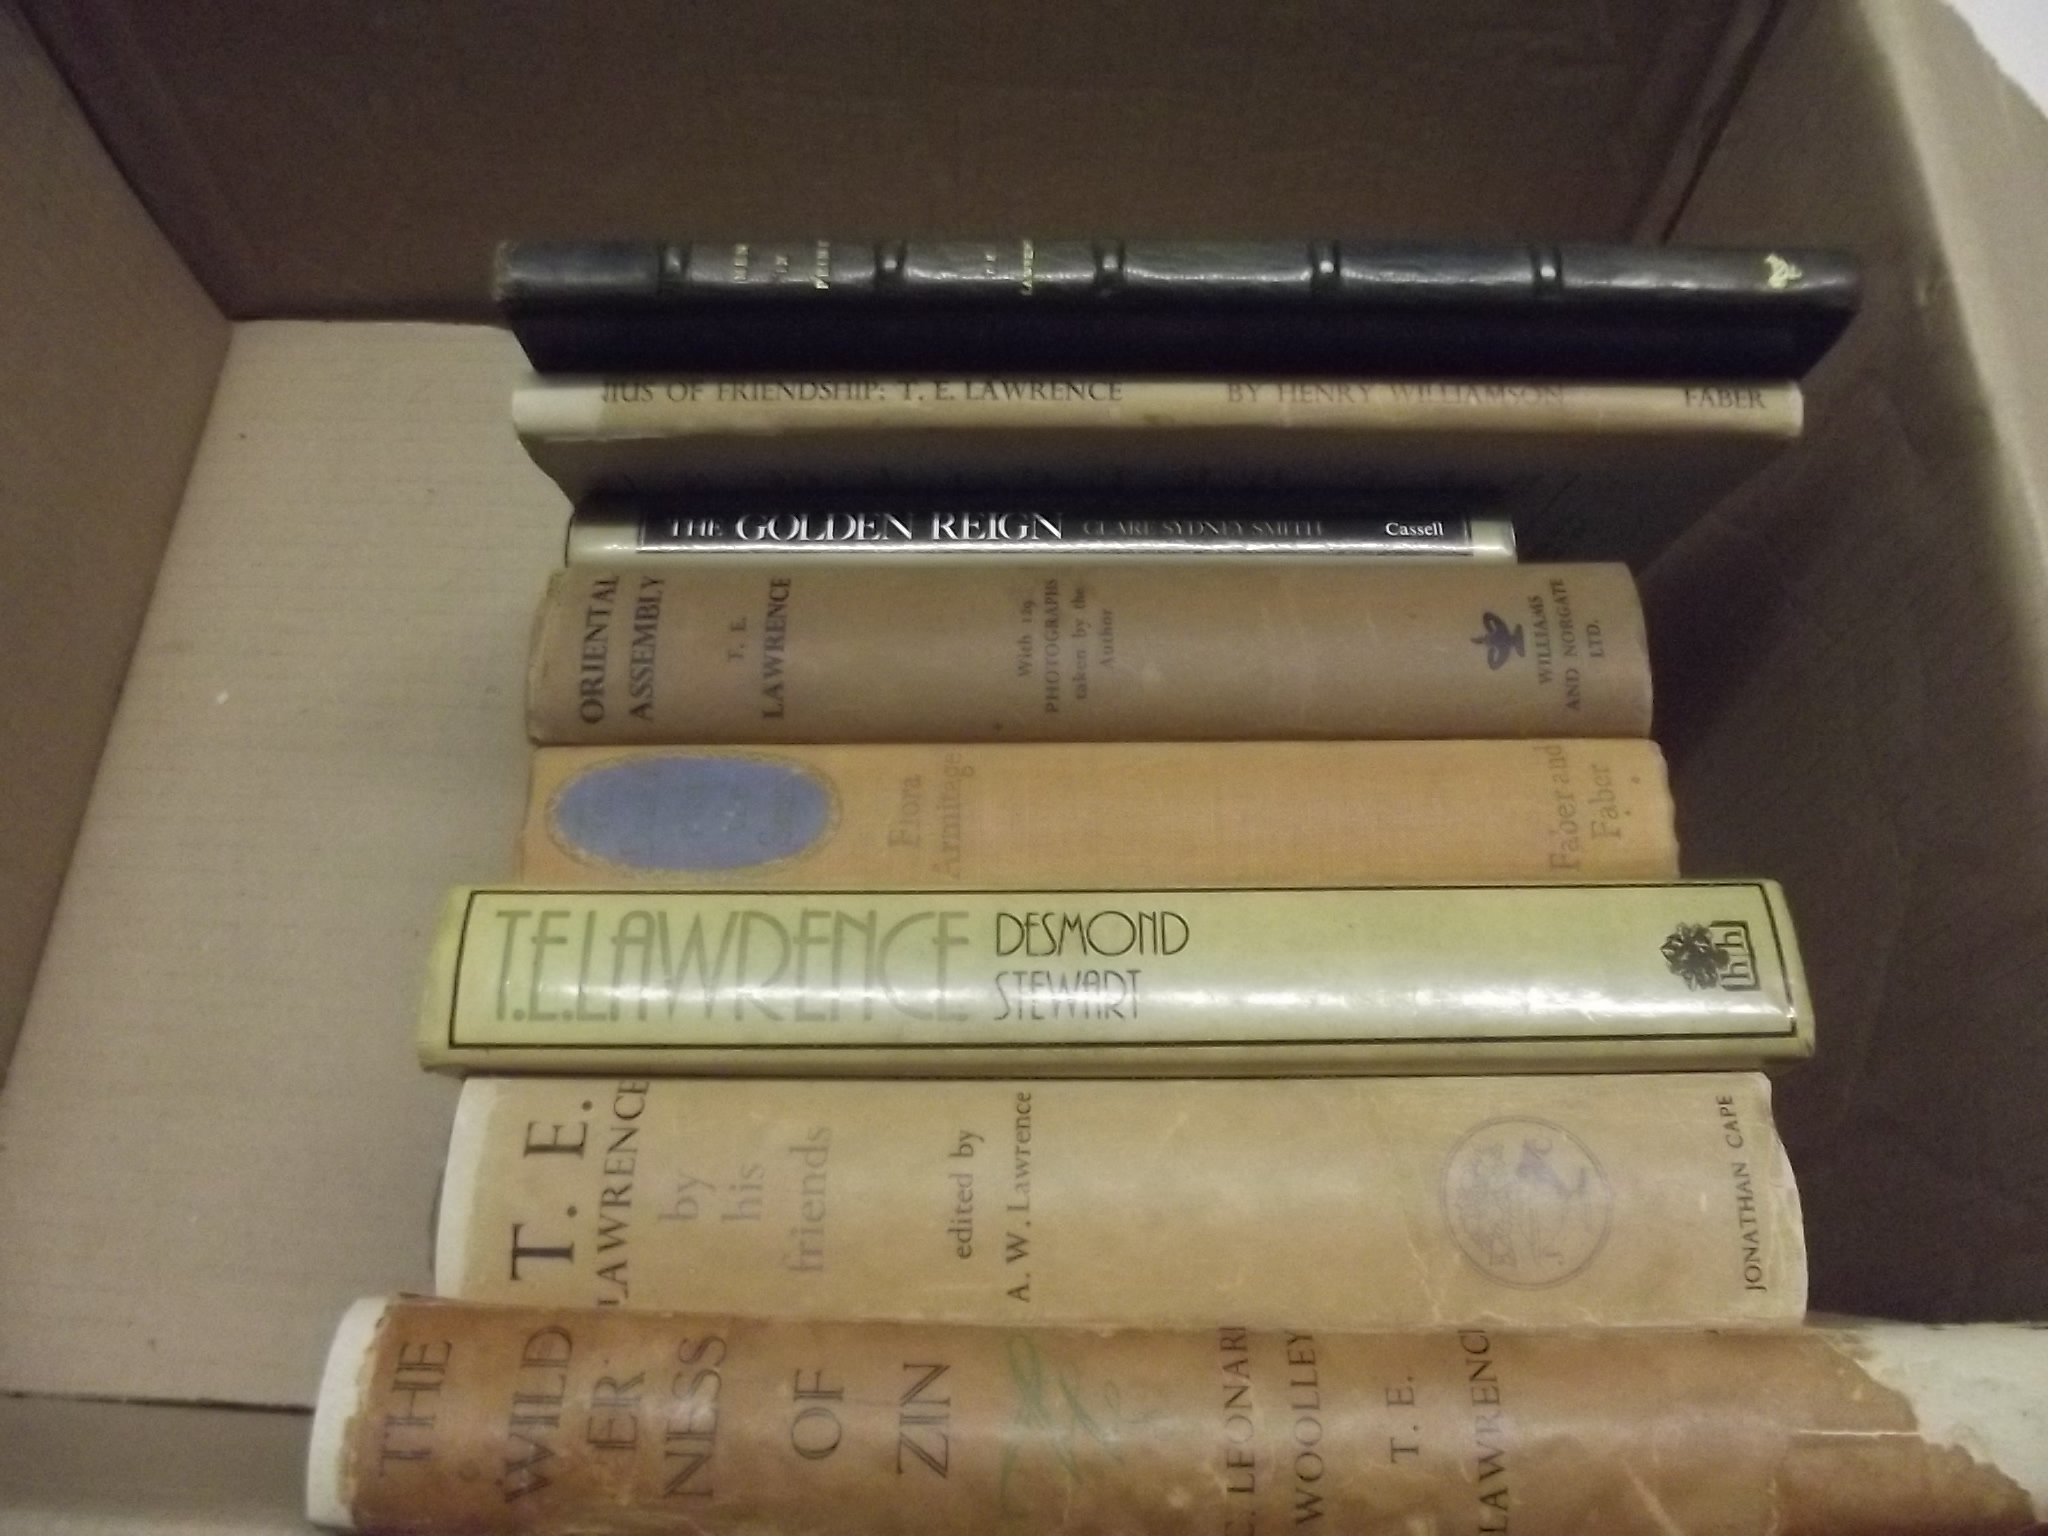 T.E. LAWRENCE. 8 vols by or about T.E. Lawrence incl "Men in Print.